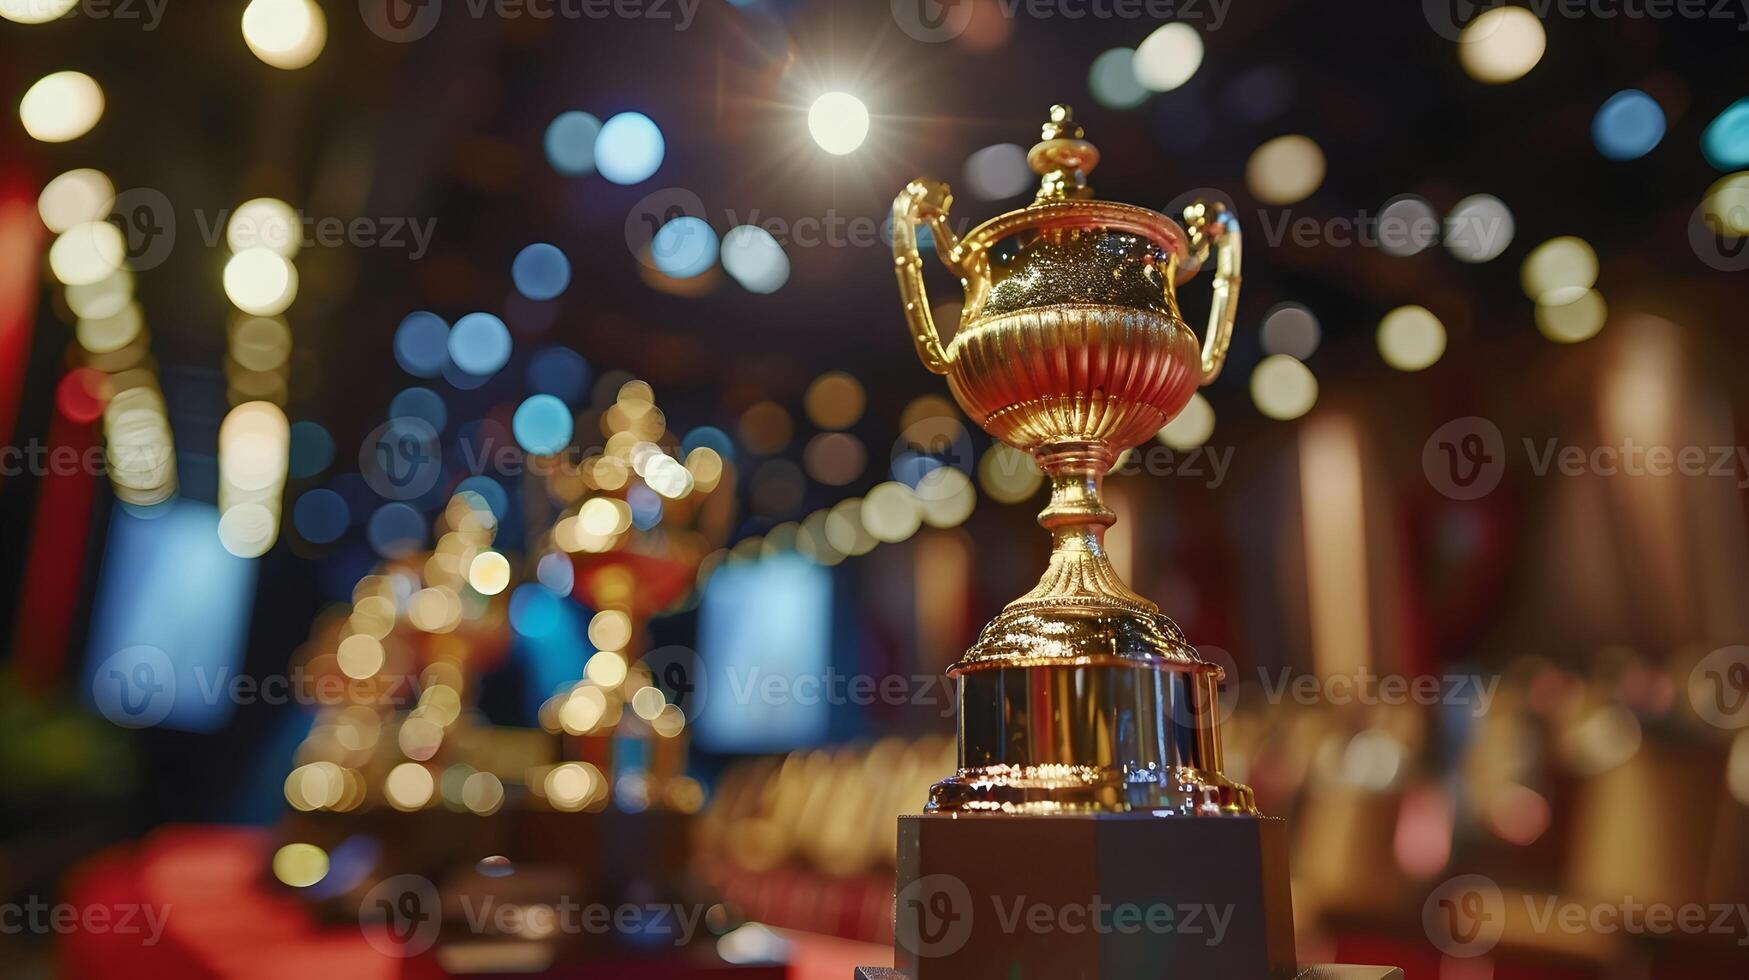 Corporate Award Ceremony Featuring Tasseled Trophies and Elegant Formal Recognition of Achievements photo